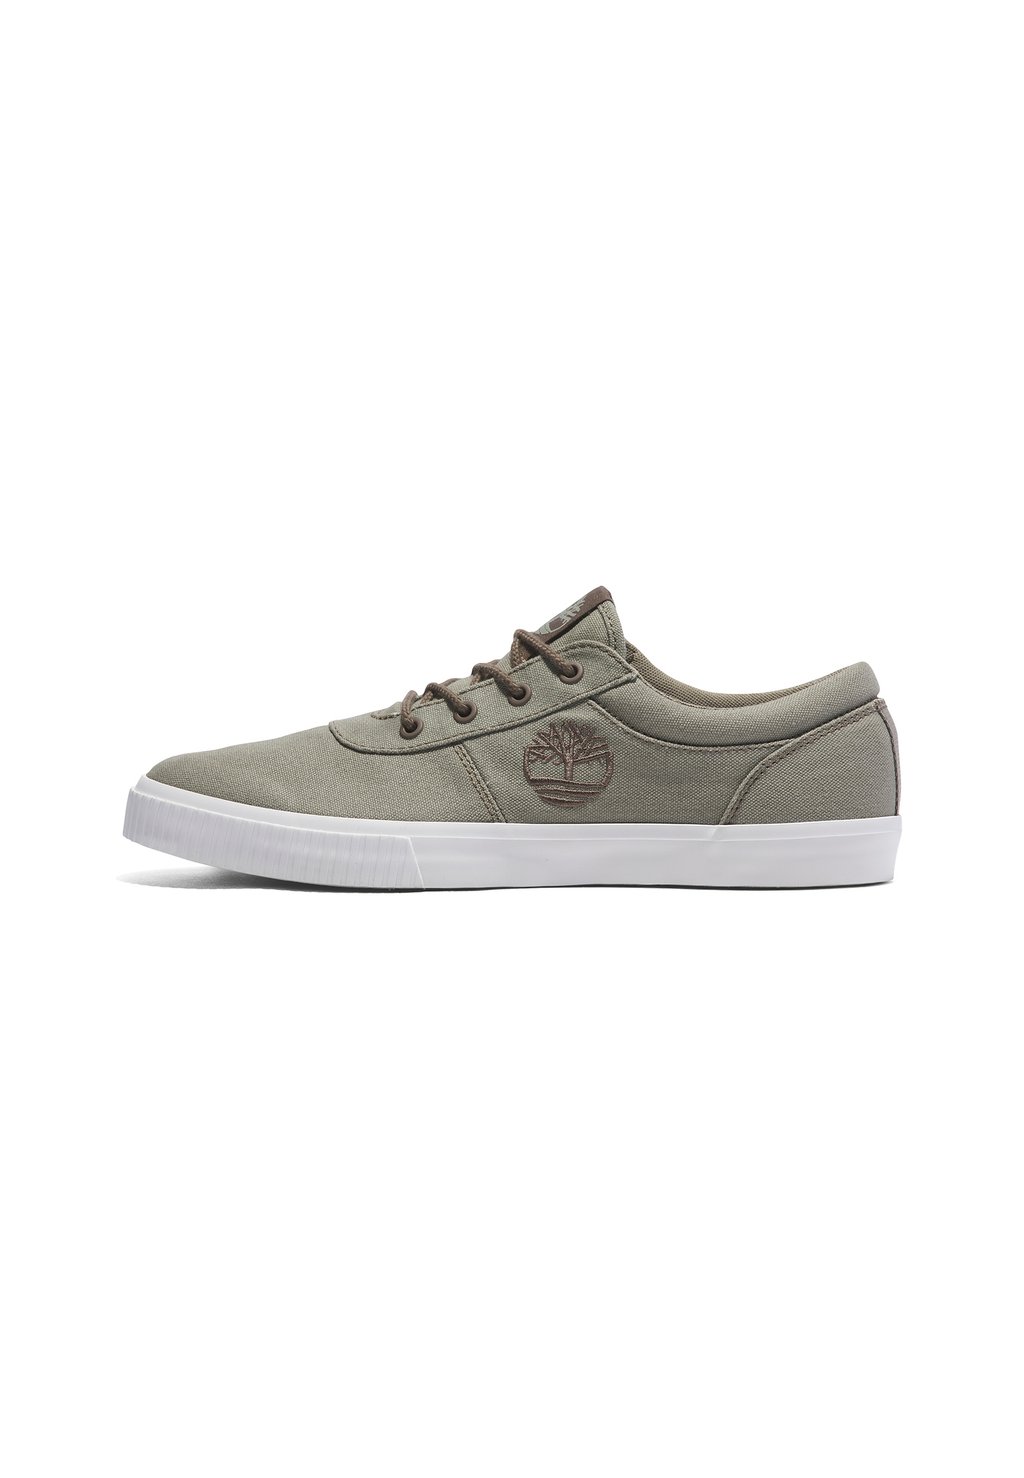 кроссовки timberland mylo bay low lace up цвет light taupe canvas Низкие кроссовки Mylo Bay Timberland, цвет light taupe canvas